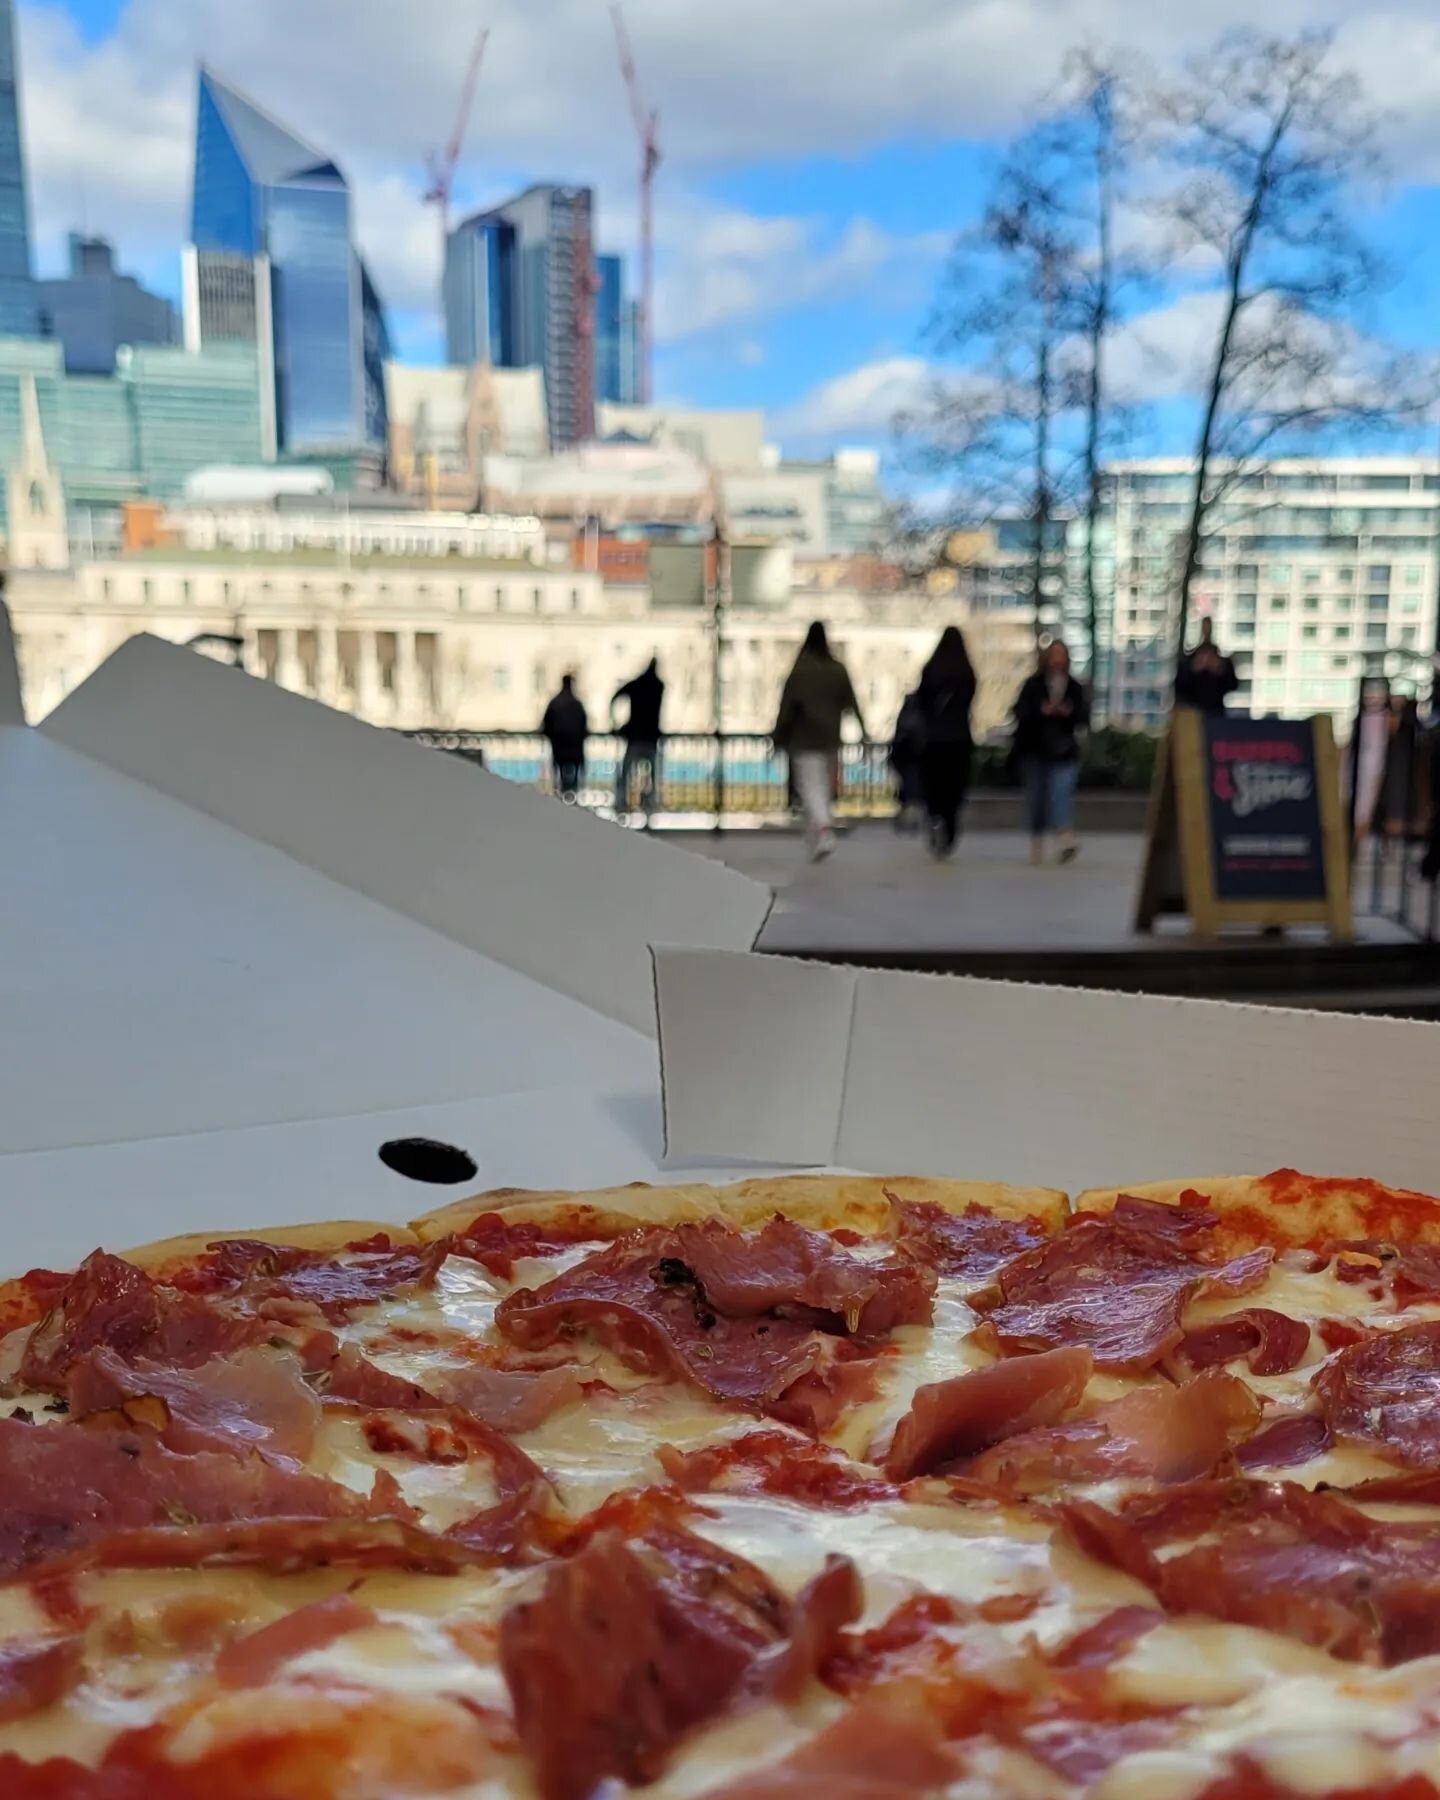 V I E W S 👀🍕 Pizza kitchen open til 9pm every day here at Hays on the River 👌

Join us for great drinks, street food &amp; and river views! Booking link in bio

Walk-ins are also welcome